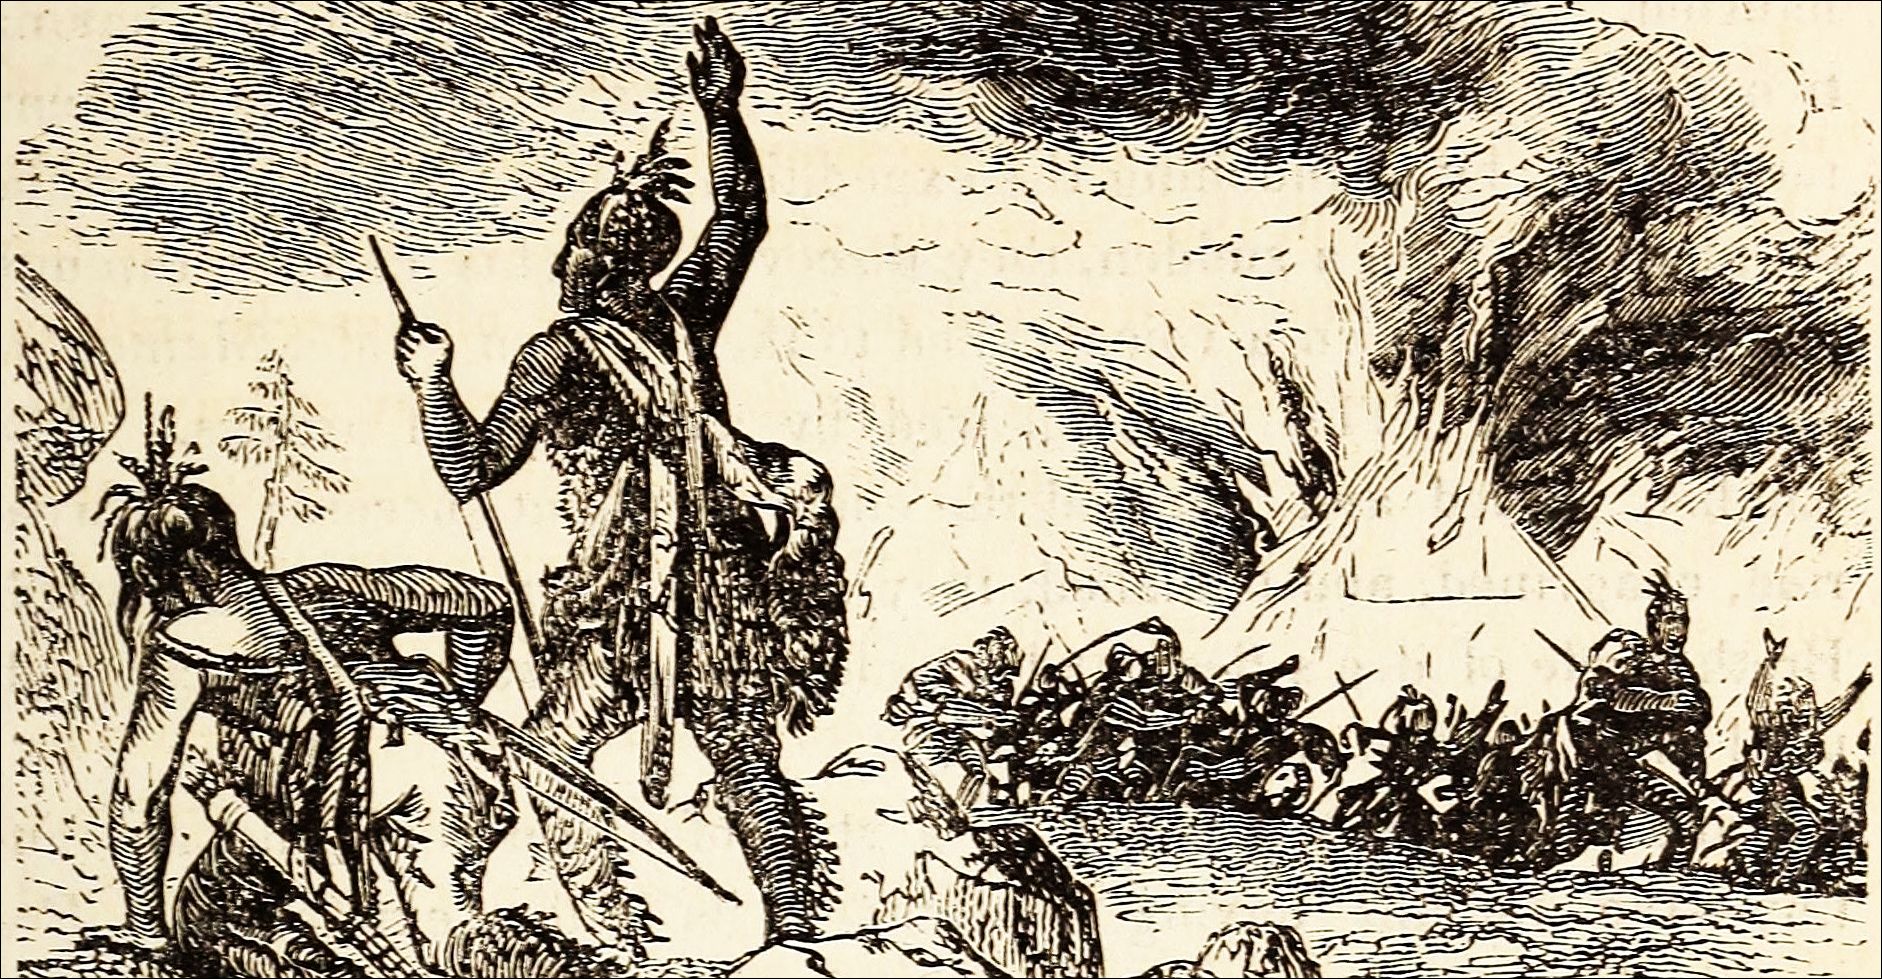 Sir Ralph Lane ordered the Secotan village of Aquascogoc burned in retaliation for the theft of  silver cup. The Secotan launched attacks on the subsequent English settlement at Roanoke and probably drove the colonists to move to the safer area controlled by the Croatoans.